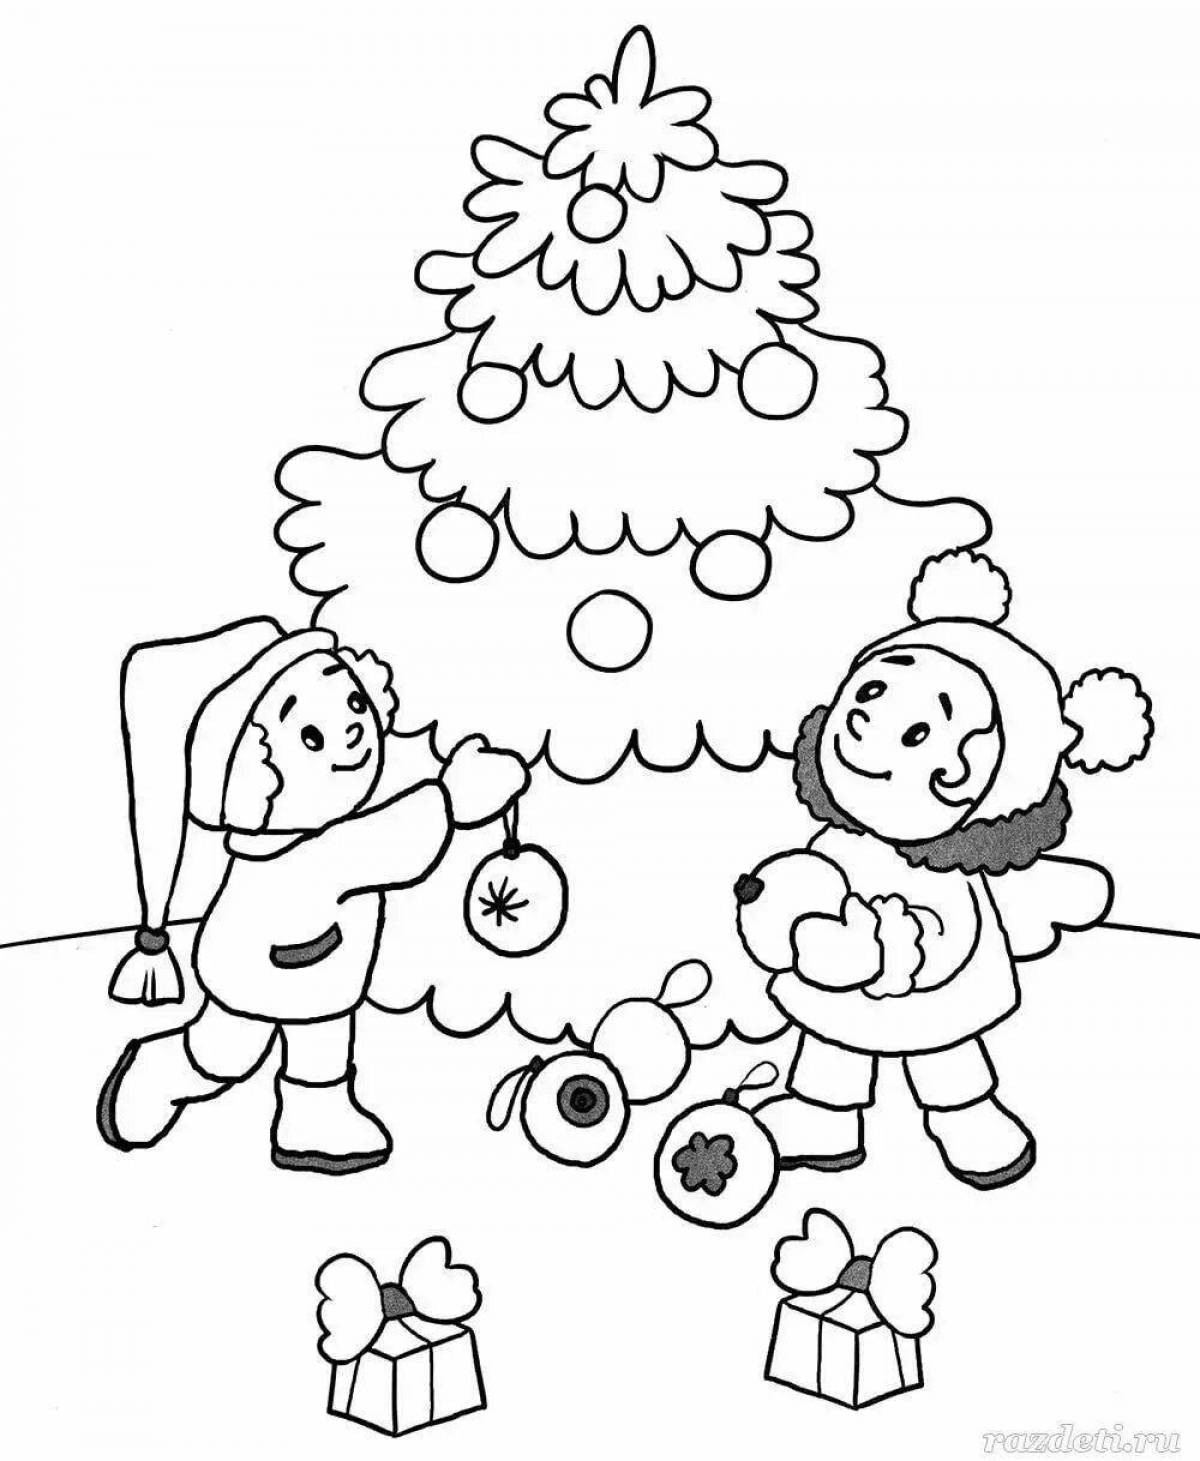 Children's funny coloring book